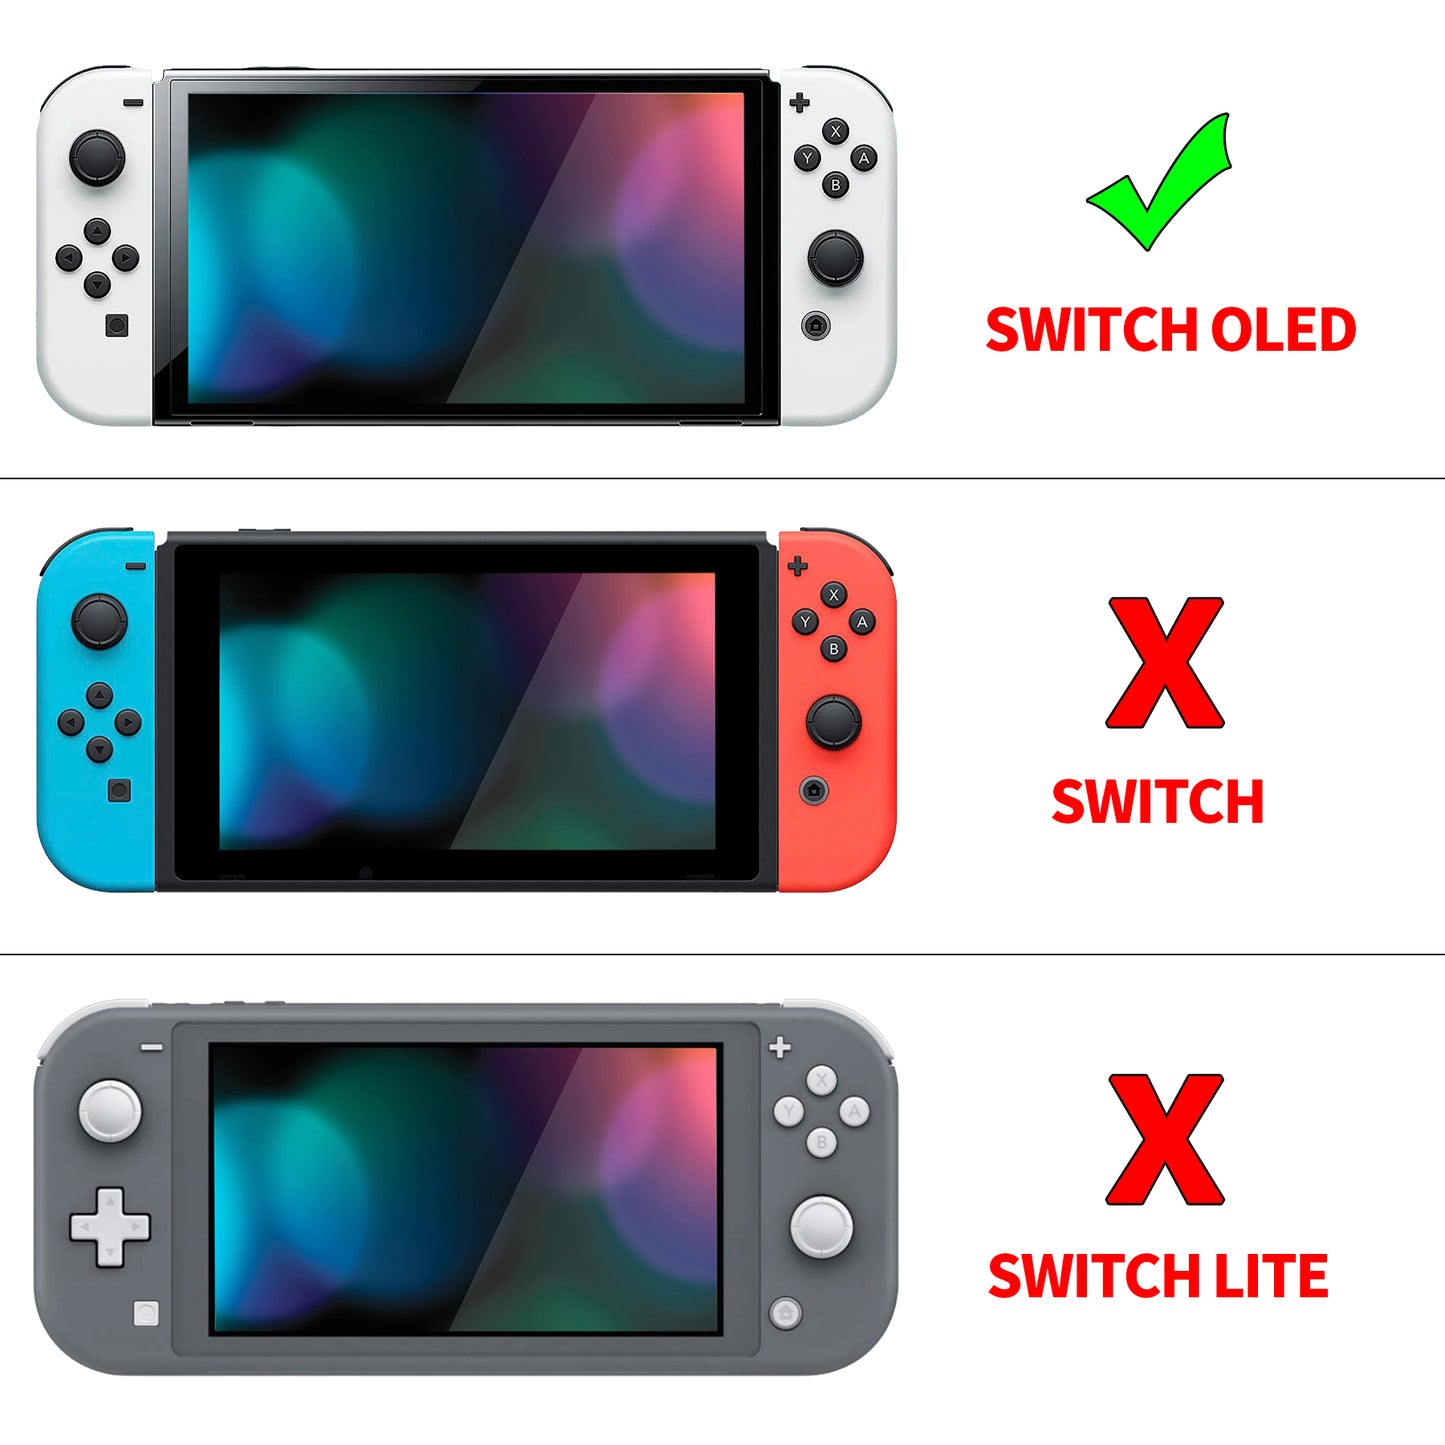 PlayVital ZealProtect Soft Protective Case for Switch OLED, Flexible Protector Grip Cover for Switch OLED with Thumb Grip Caps & ABXY Direction Button Caps - Santa Deer - XSOYV6044 playvital